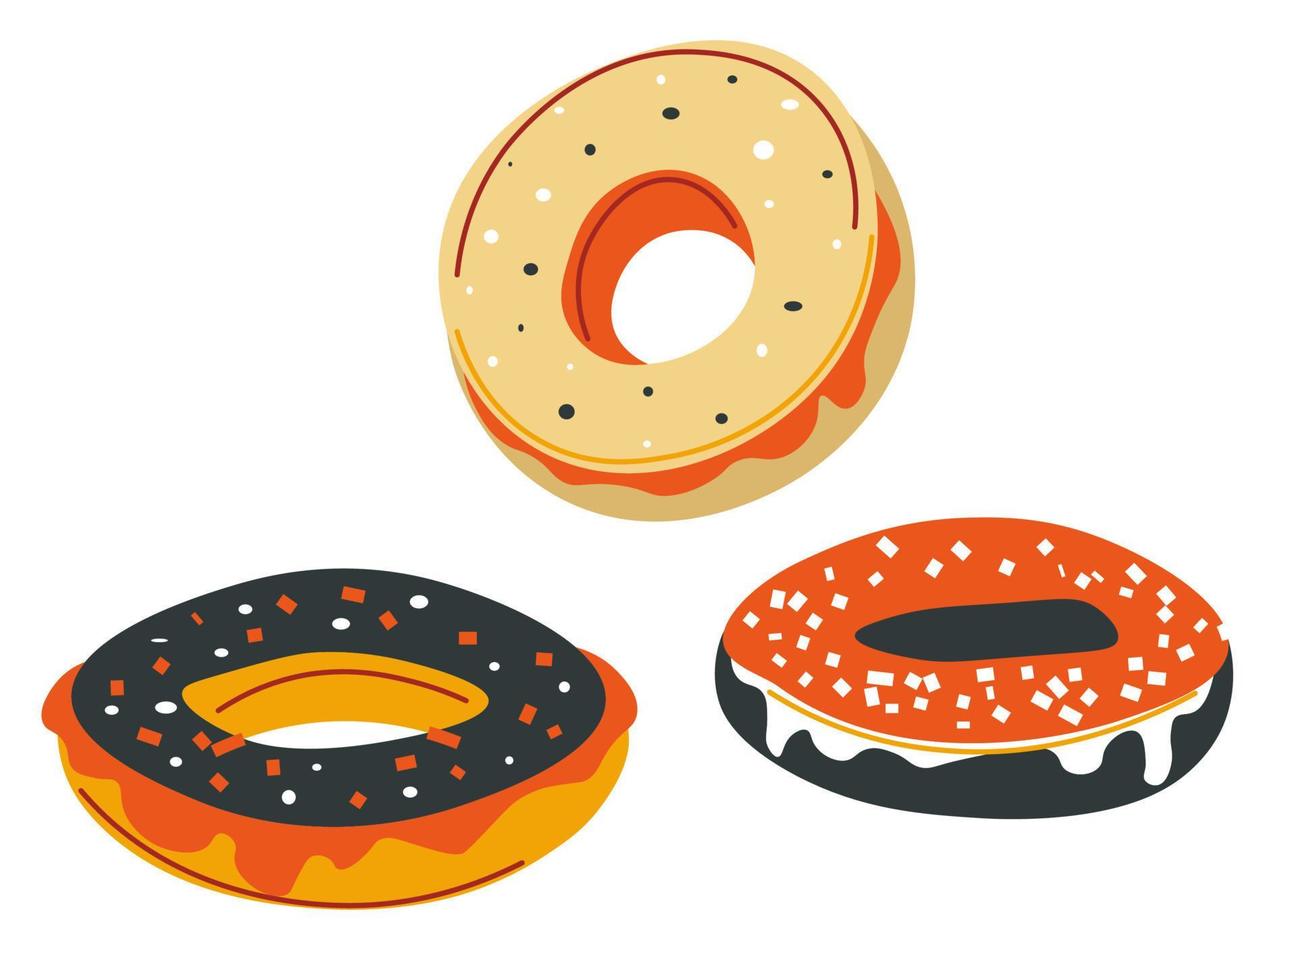 Sweet donuts with glazing and sprinkles on top vector